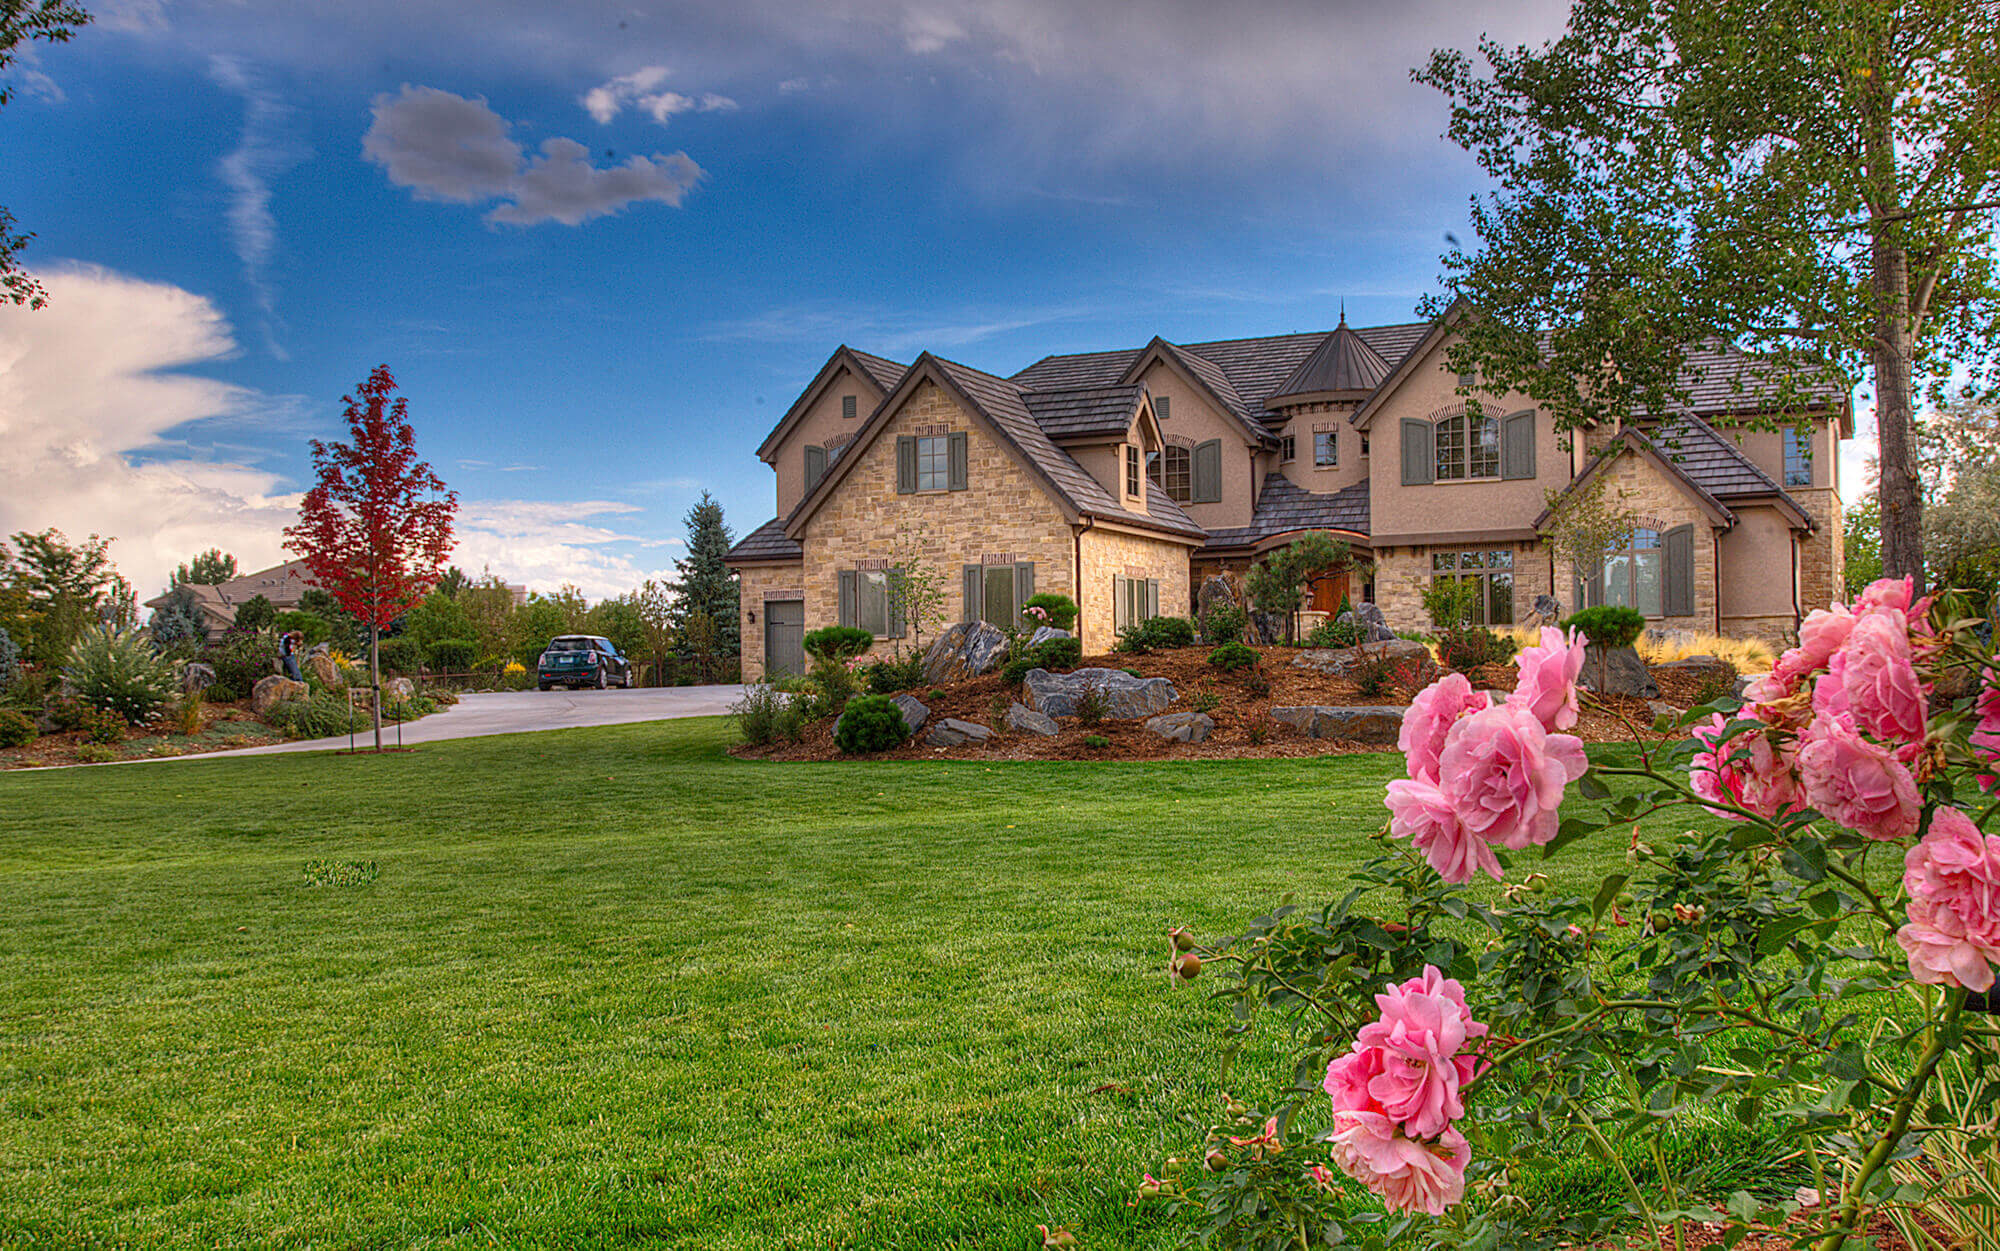 Front view of the house from grass field with beautiful pink roses